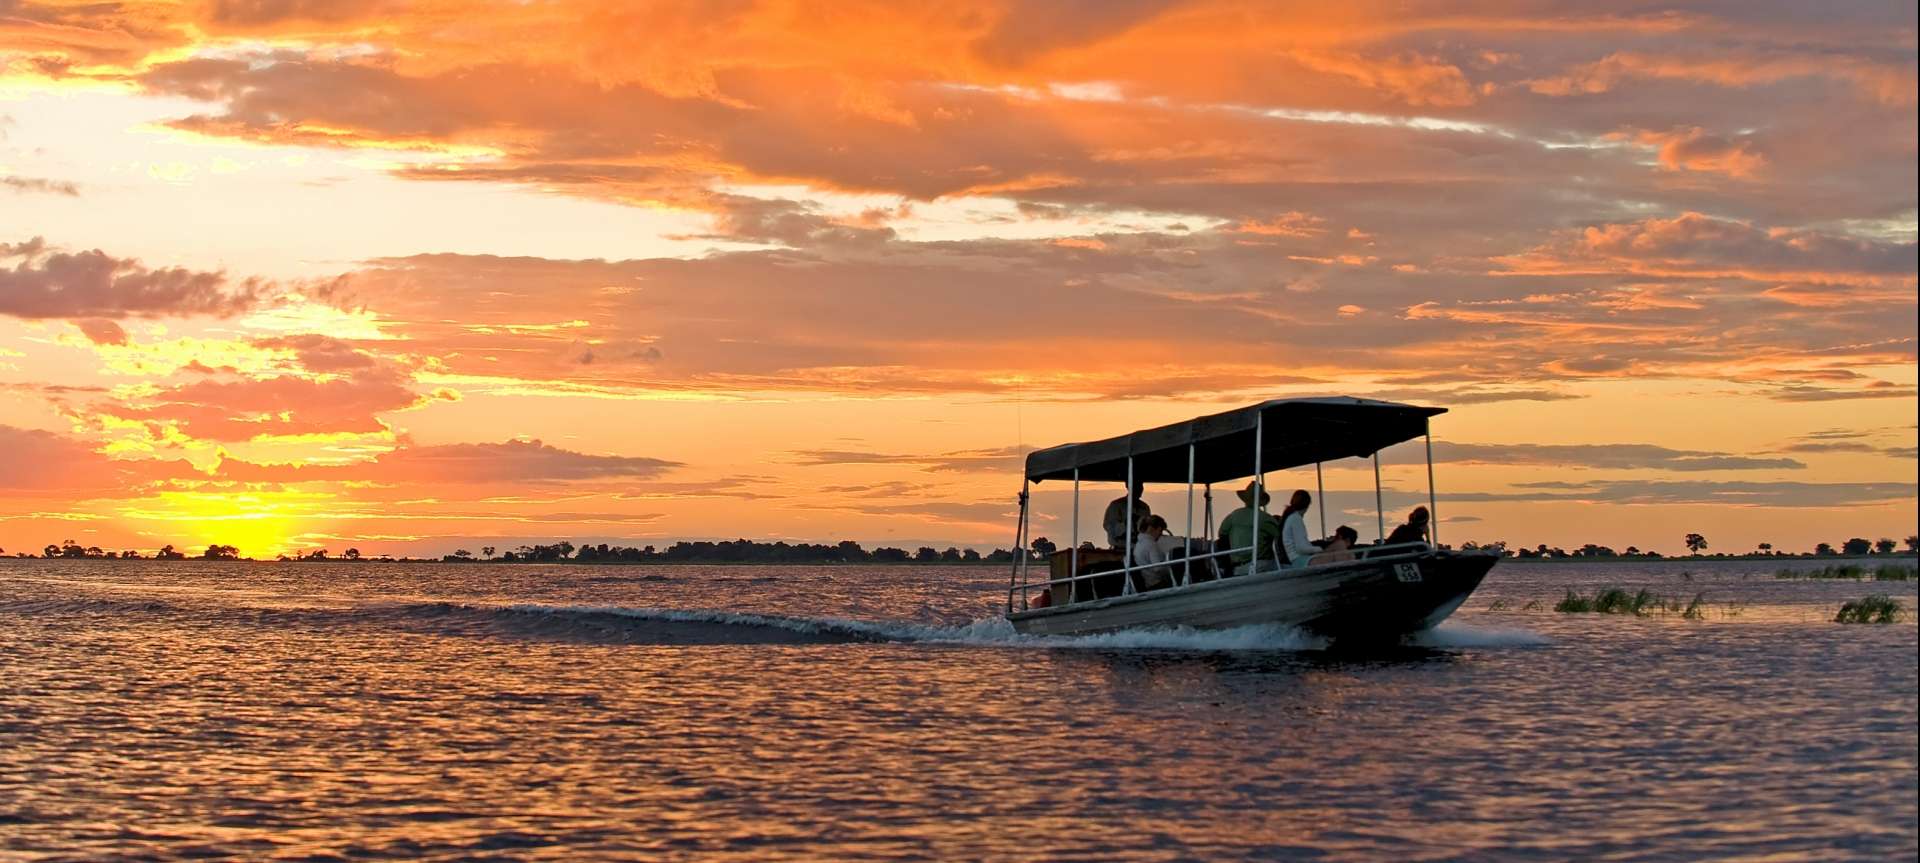 A boat cruise on the Chobe river is a magical experience